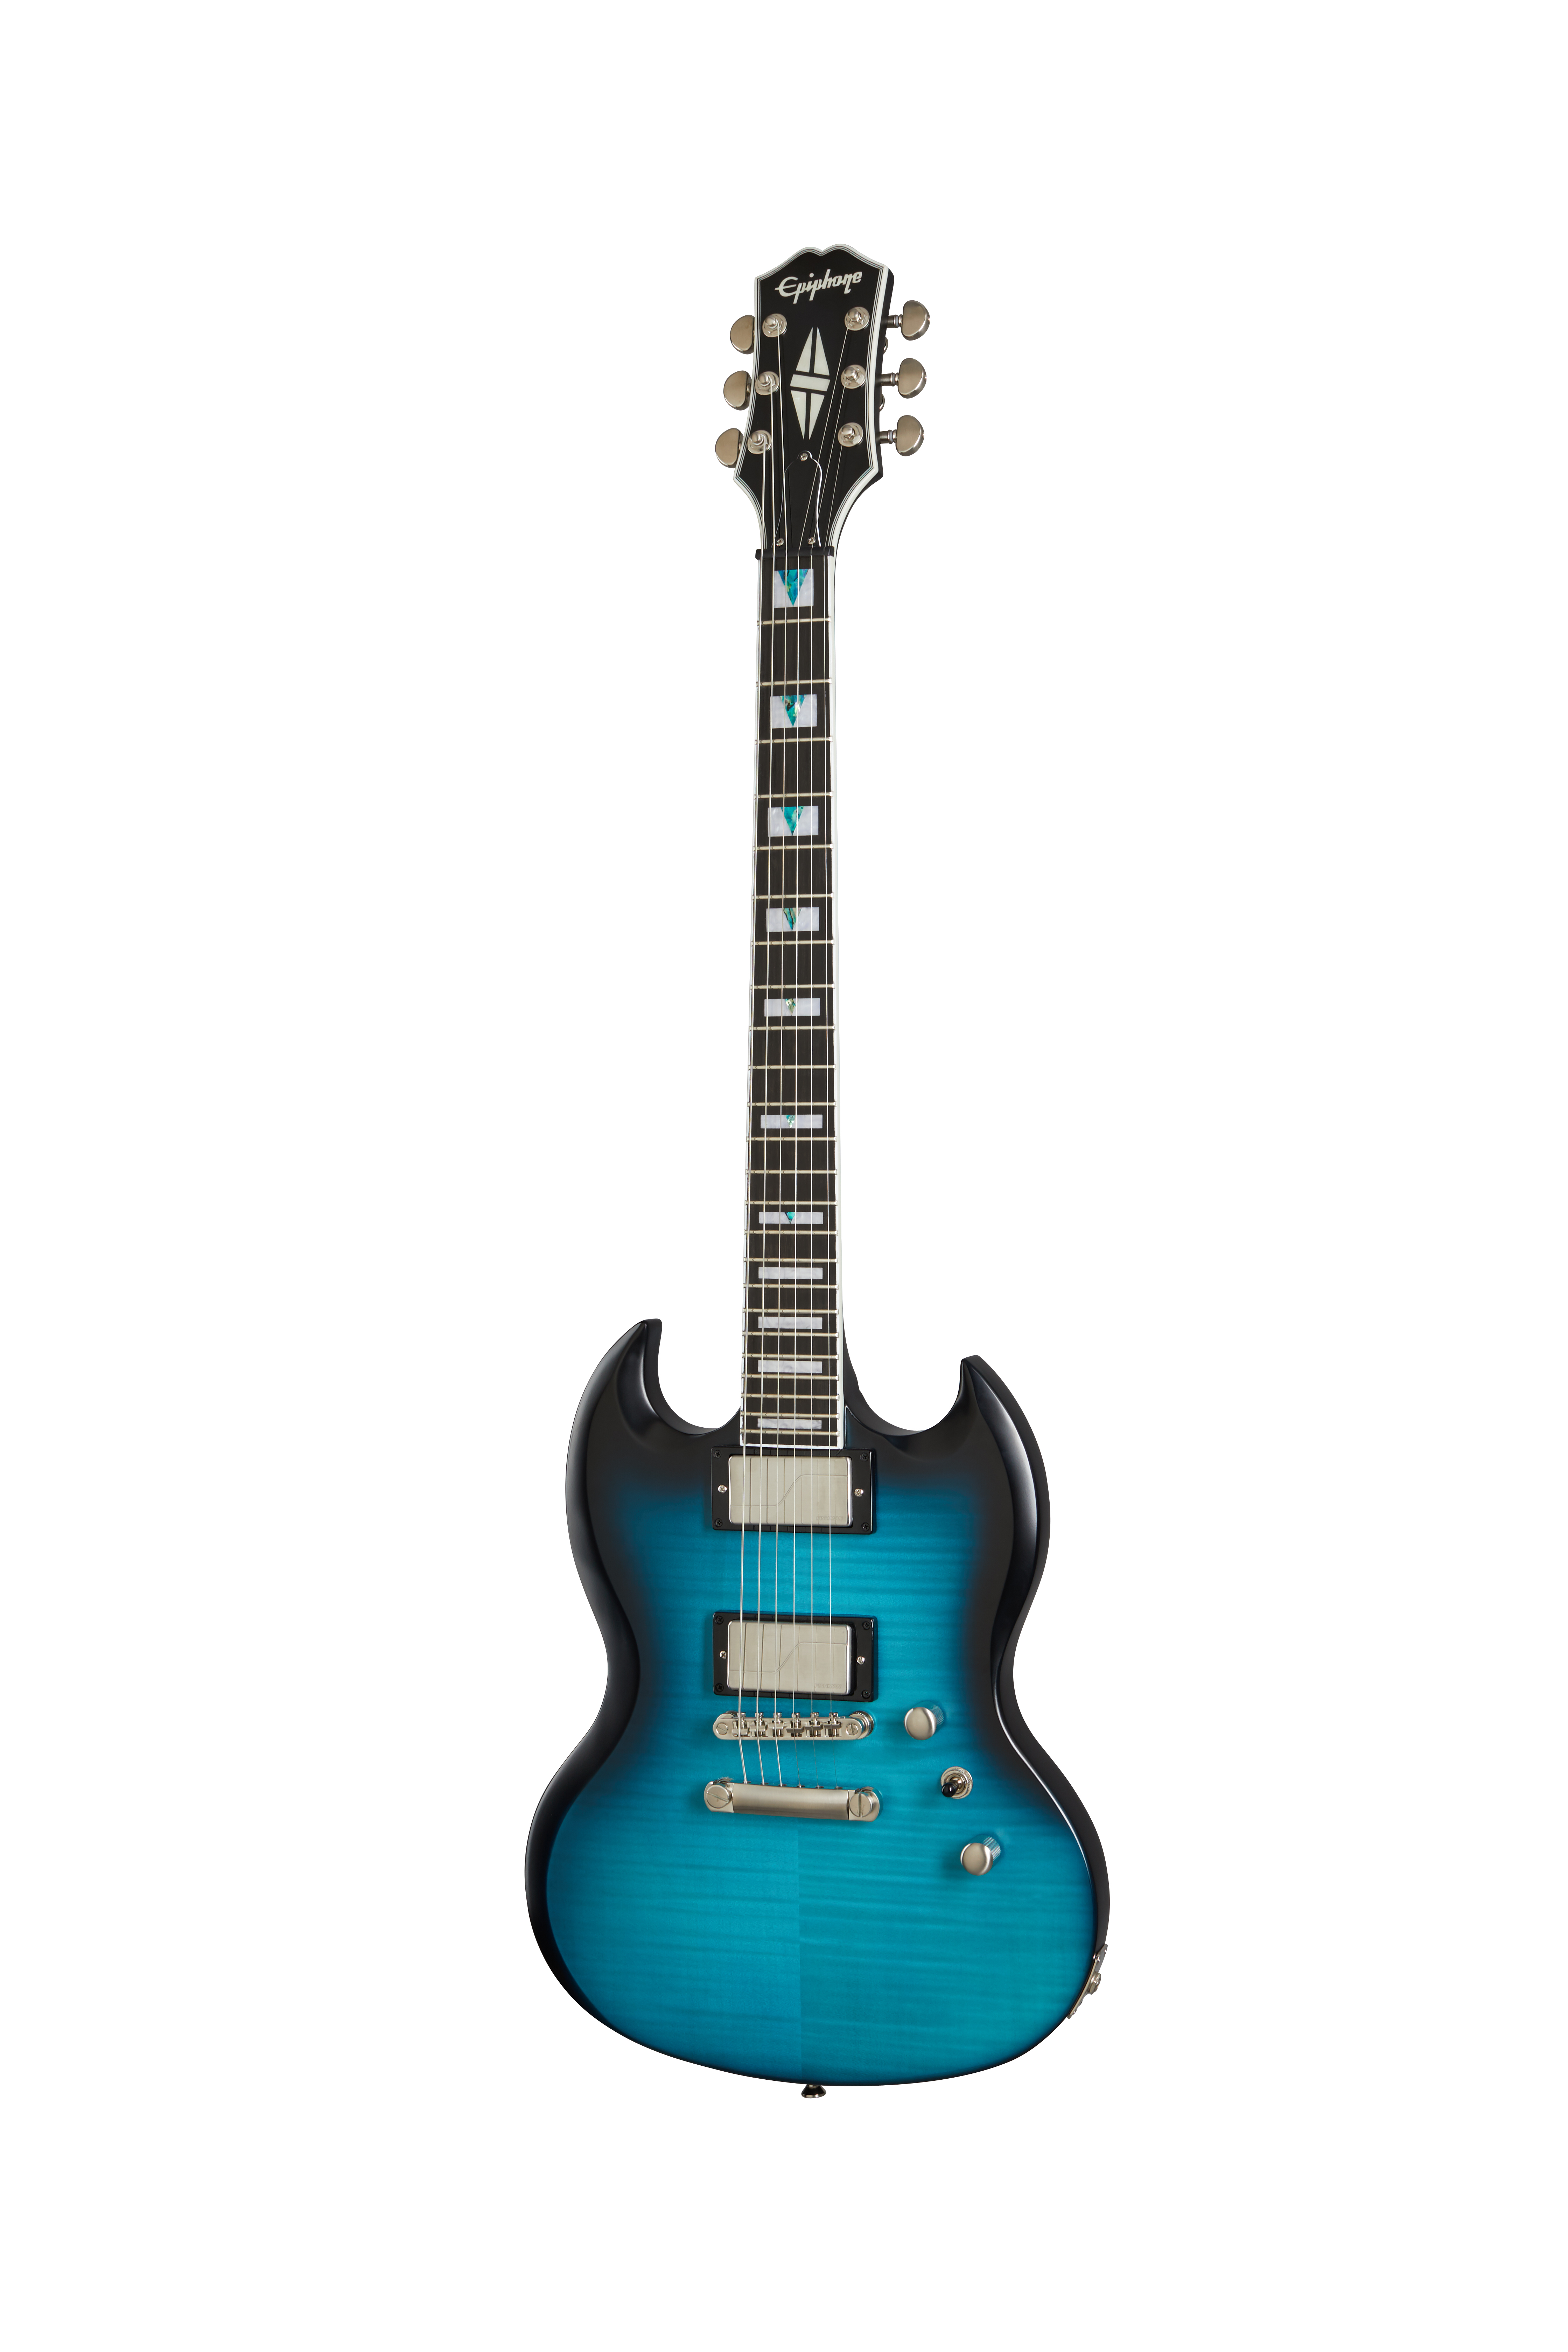 Prophecy SG | Epiphone